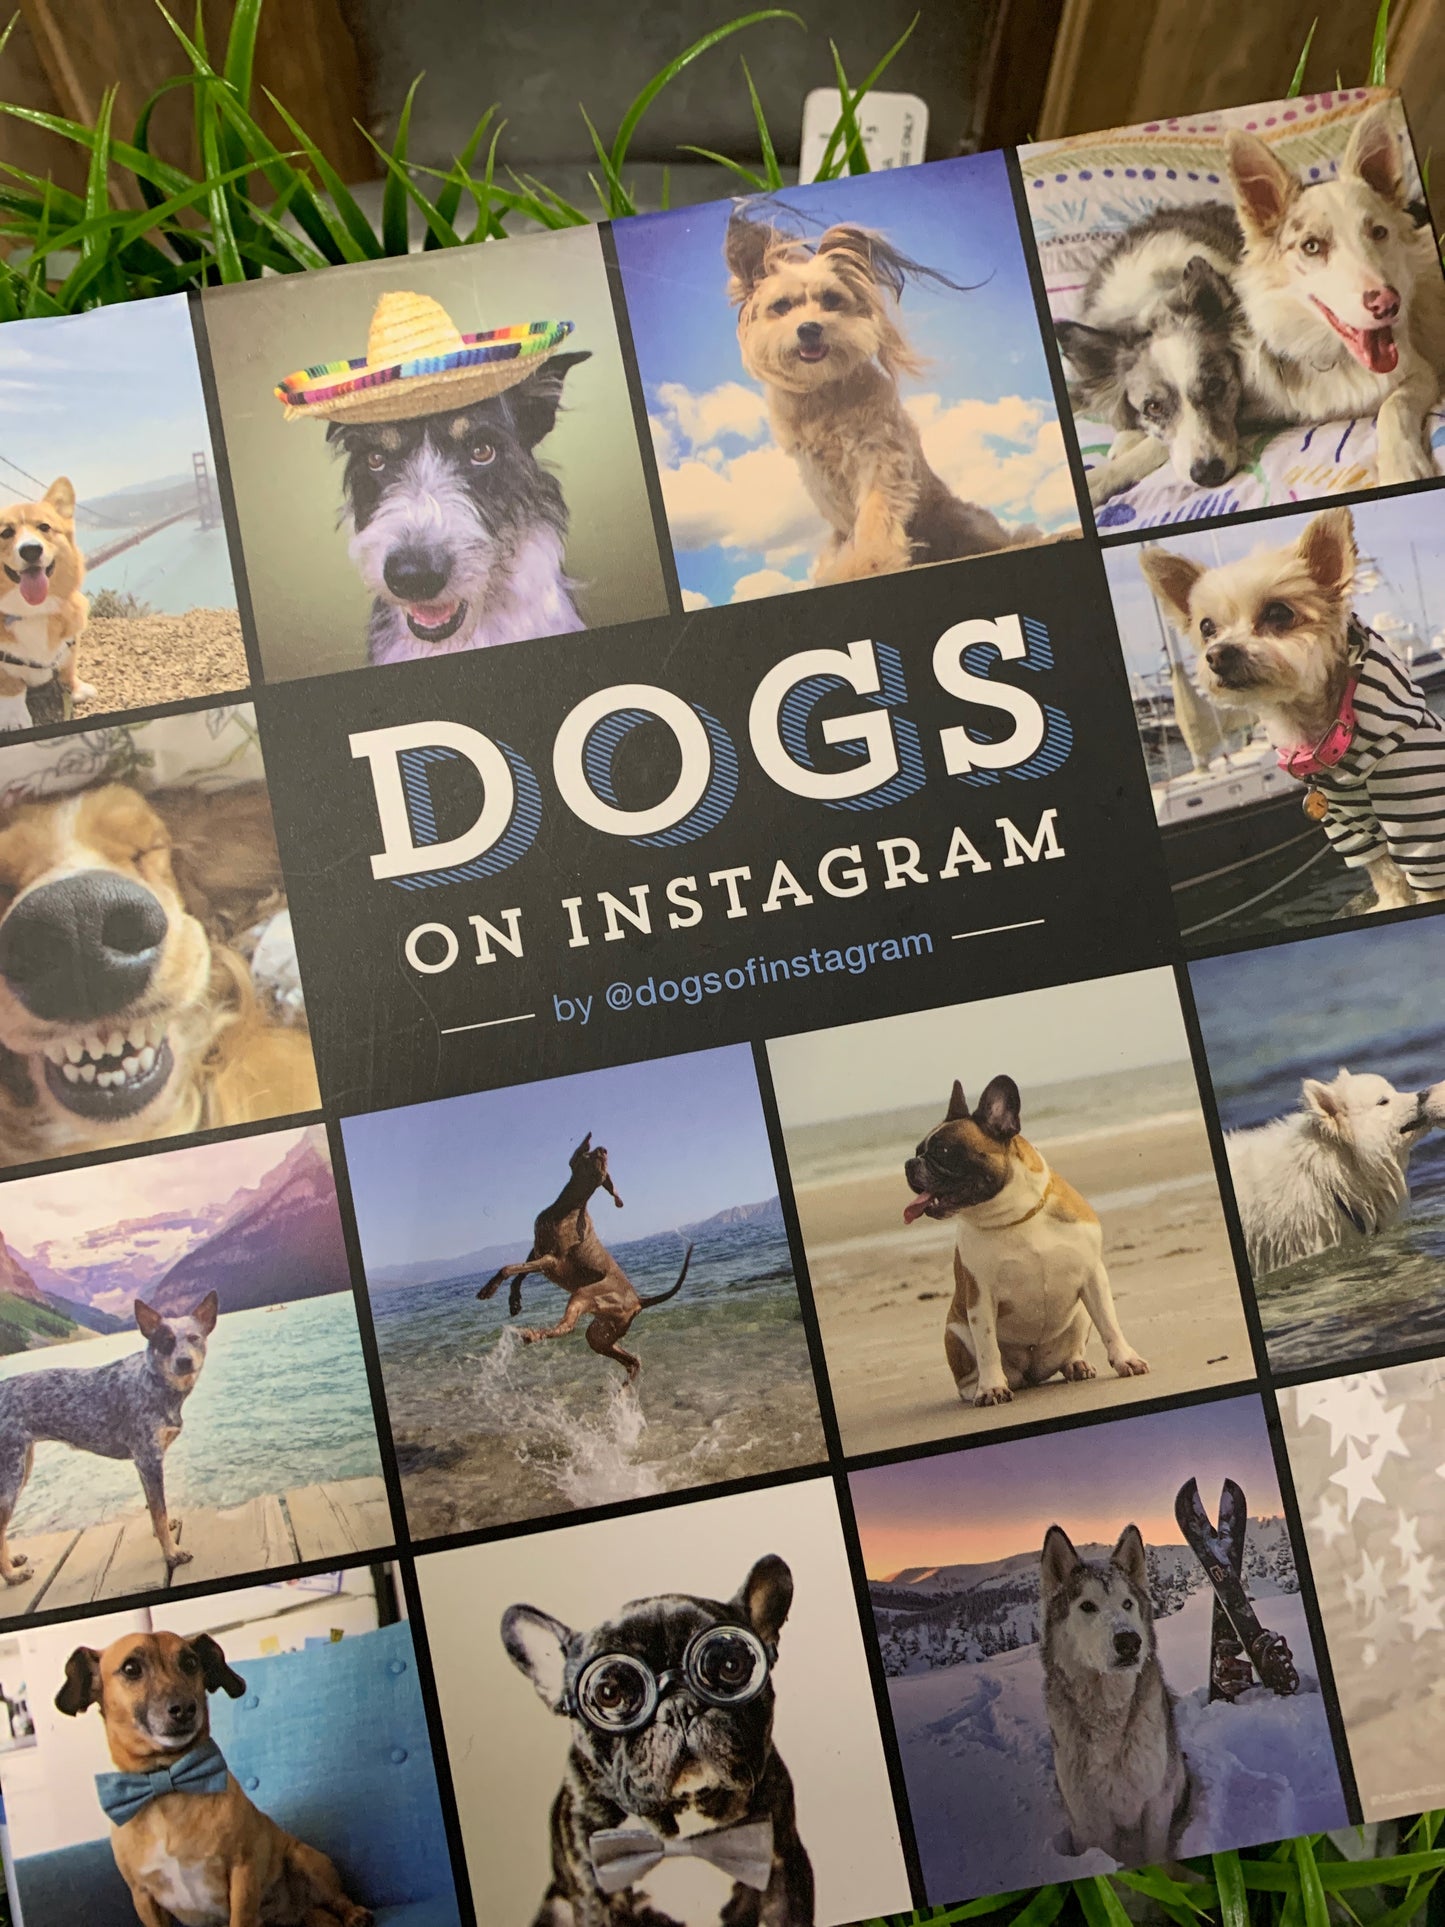 Dog lovers are a passionate bunch, and Instagram is the perfect platform for expressing their devotion. The curators behind @dogsofinstagram channel this passion perfectly in this delightful book, a must-have collection featuring over 400 of the best crowdsourced dog photographs from their wildly popular feed. For dog lovers by dog lovers, this eclectic compilation celebrates the full spectrum of things to love about our four-legged friends.